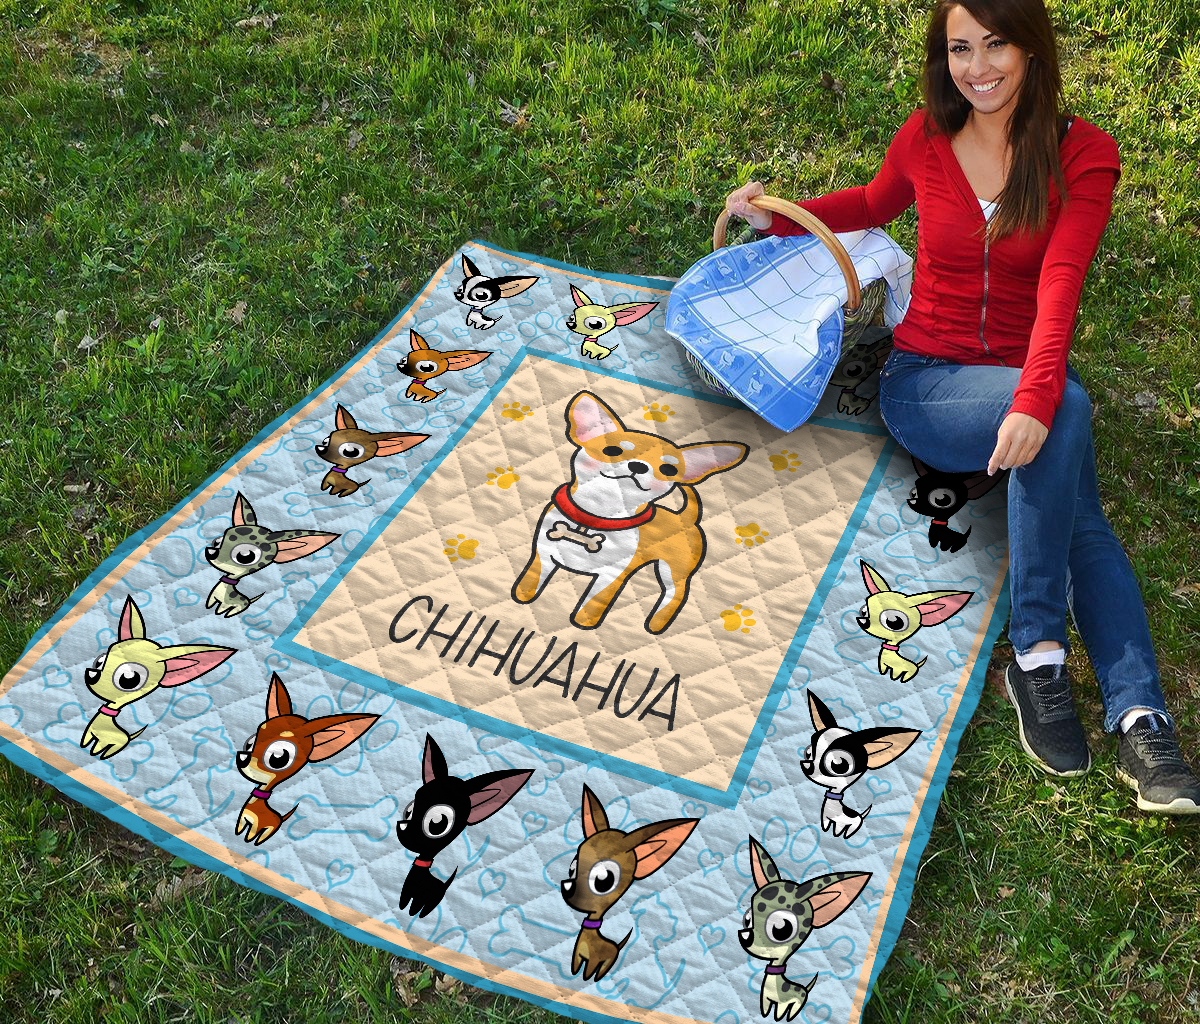 Baby chihuahua quilt 2